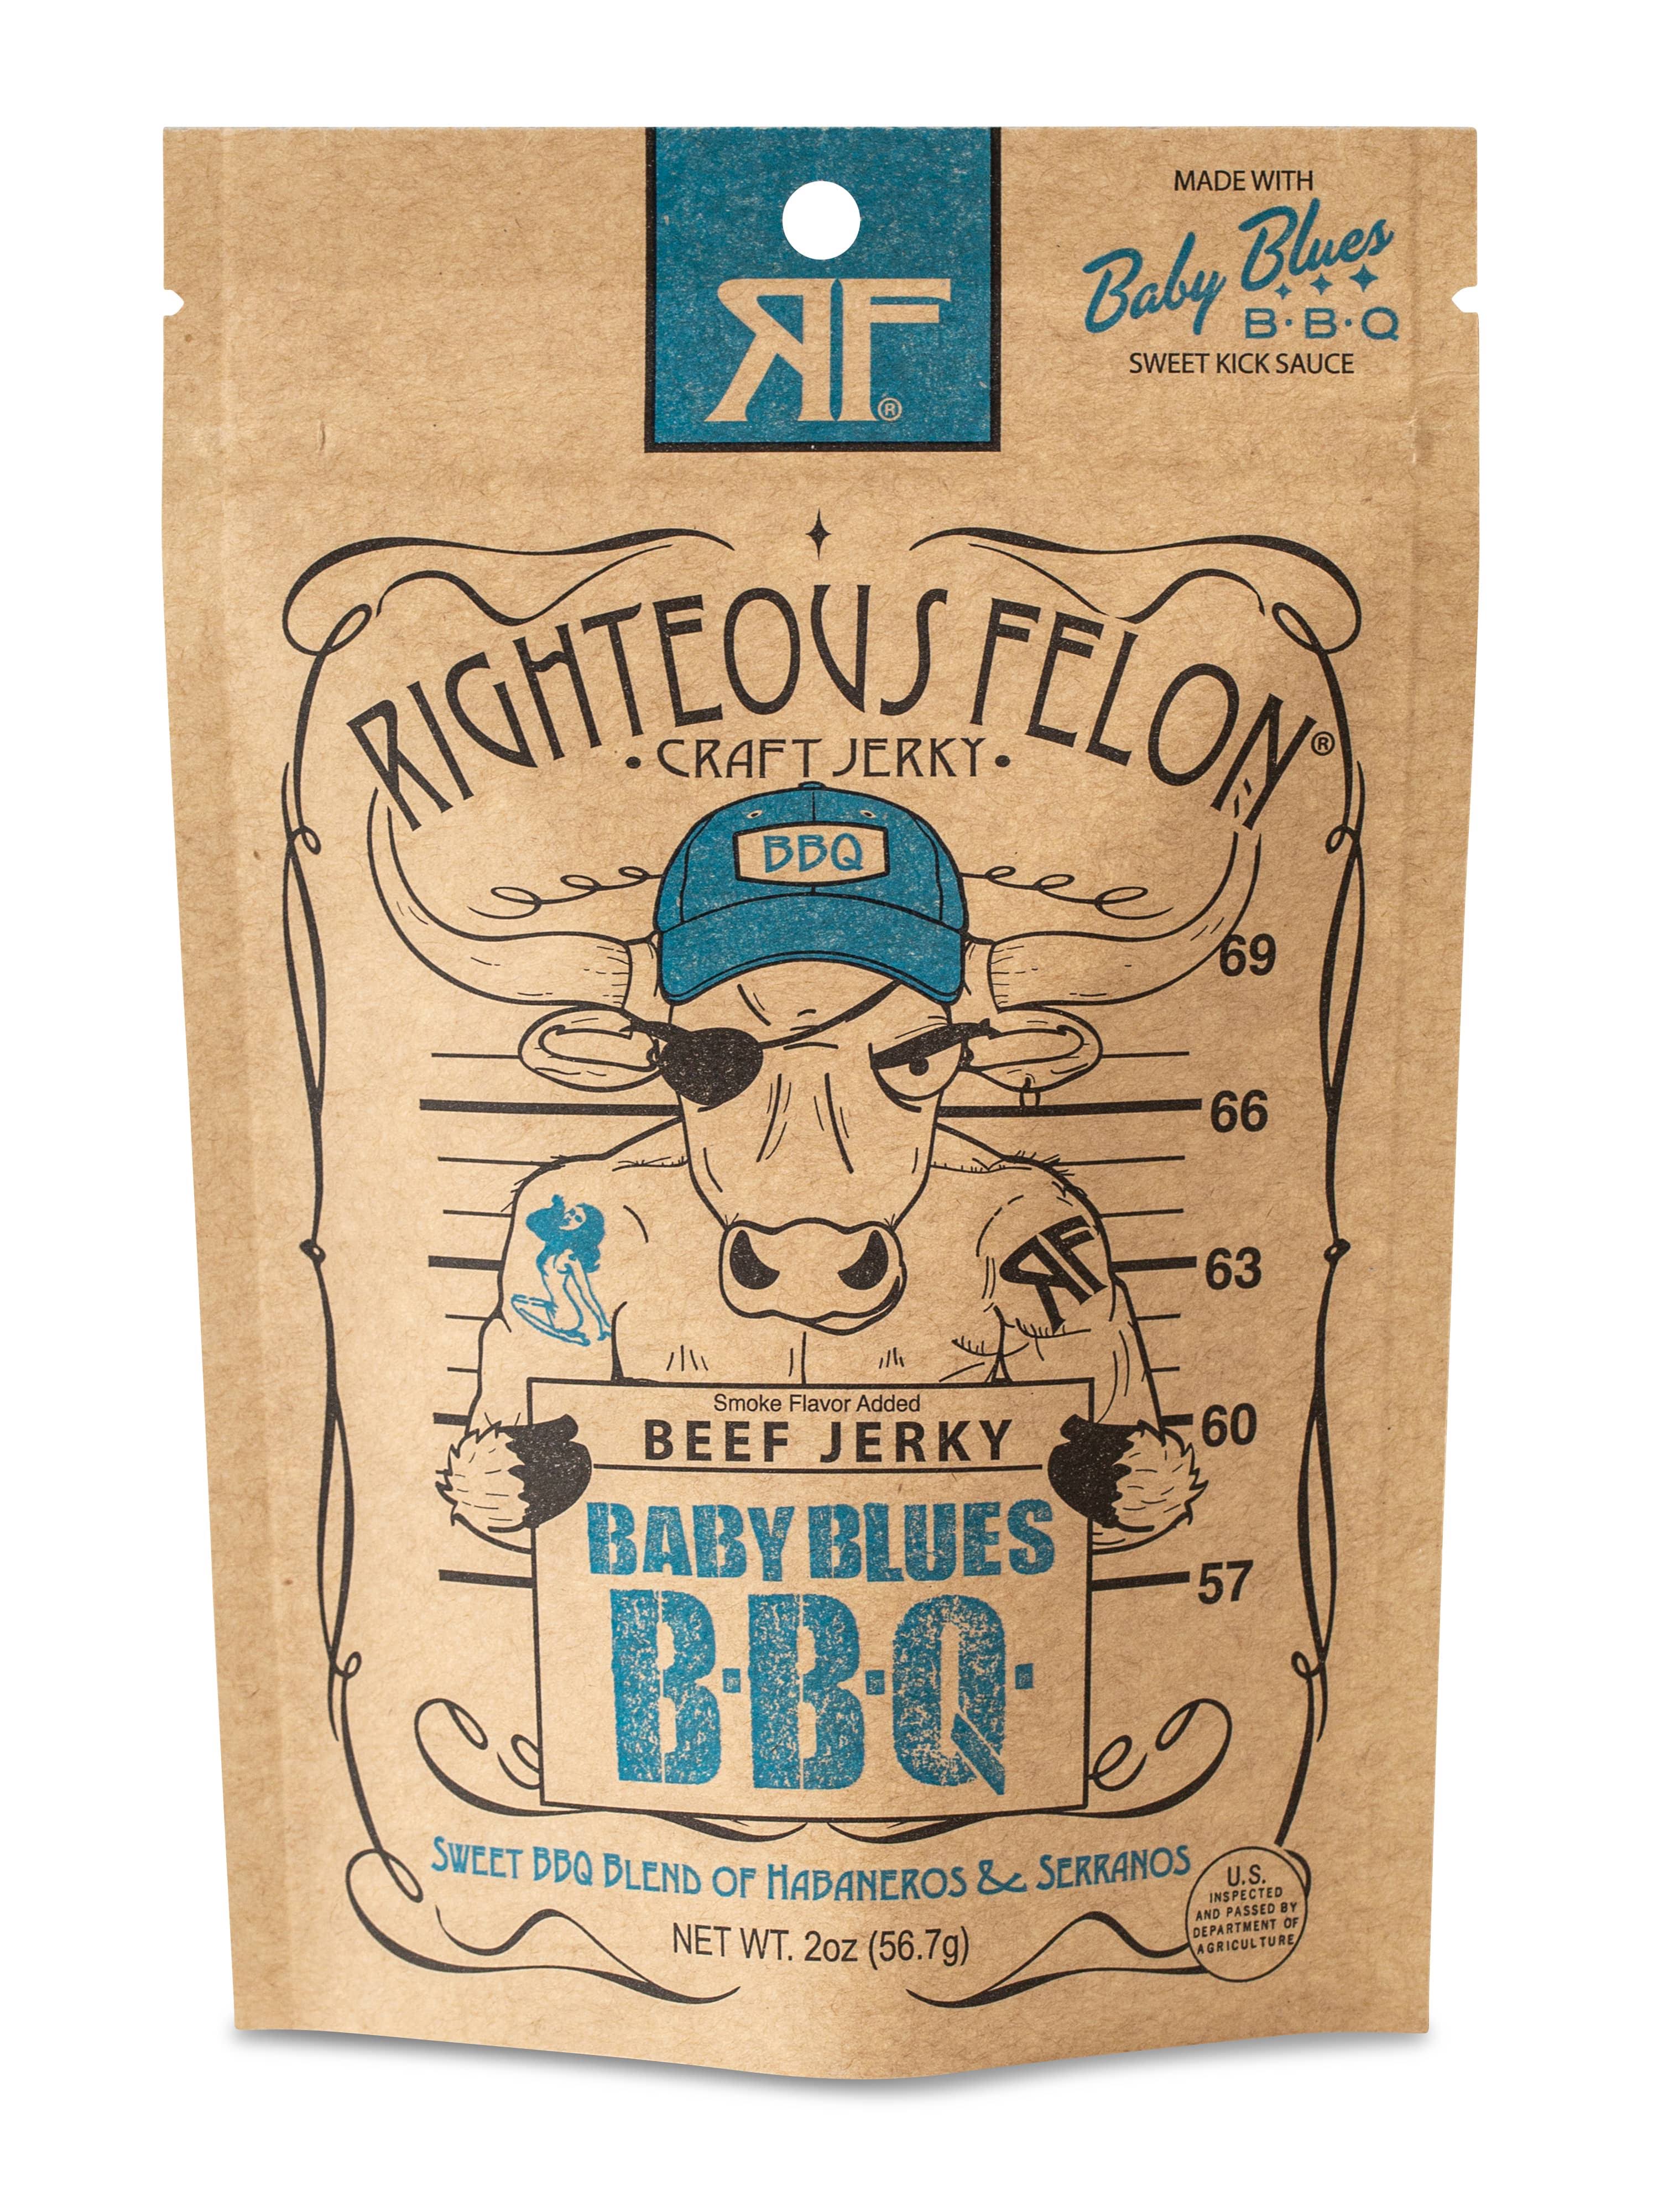 Righteous Felon Jerky, Crafted, Beef, Smoke Flavor Added - 2 oz